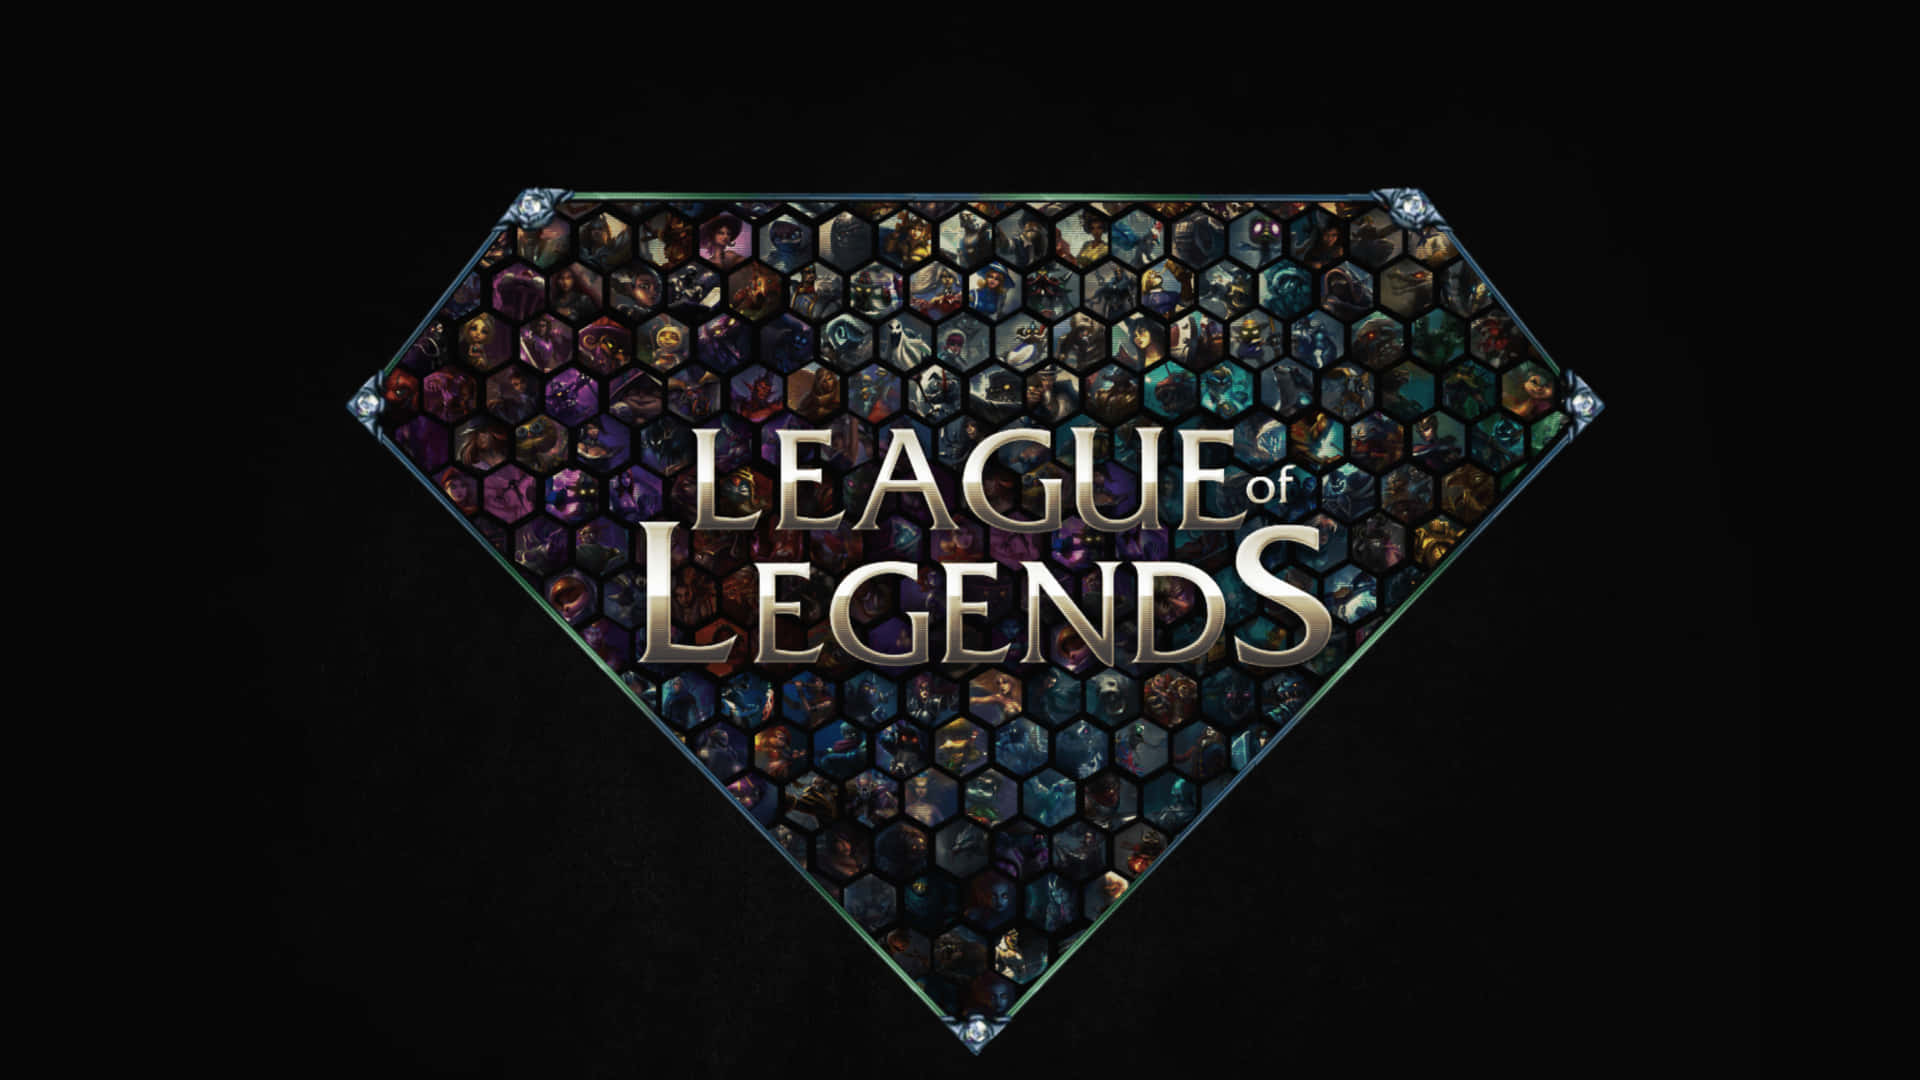 Fly into battle with League of Legends